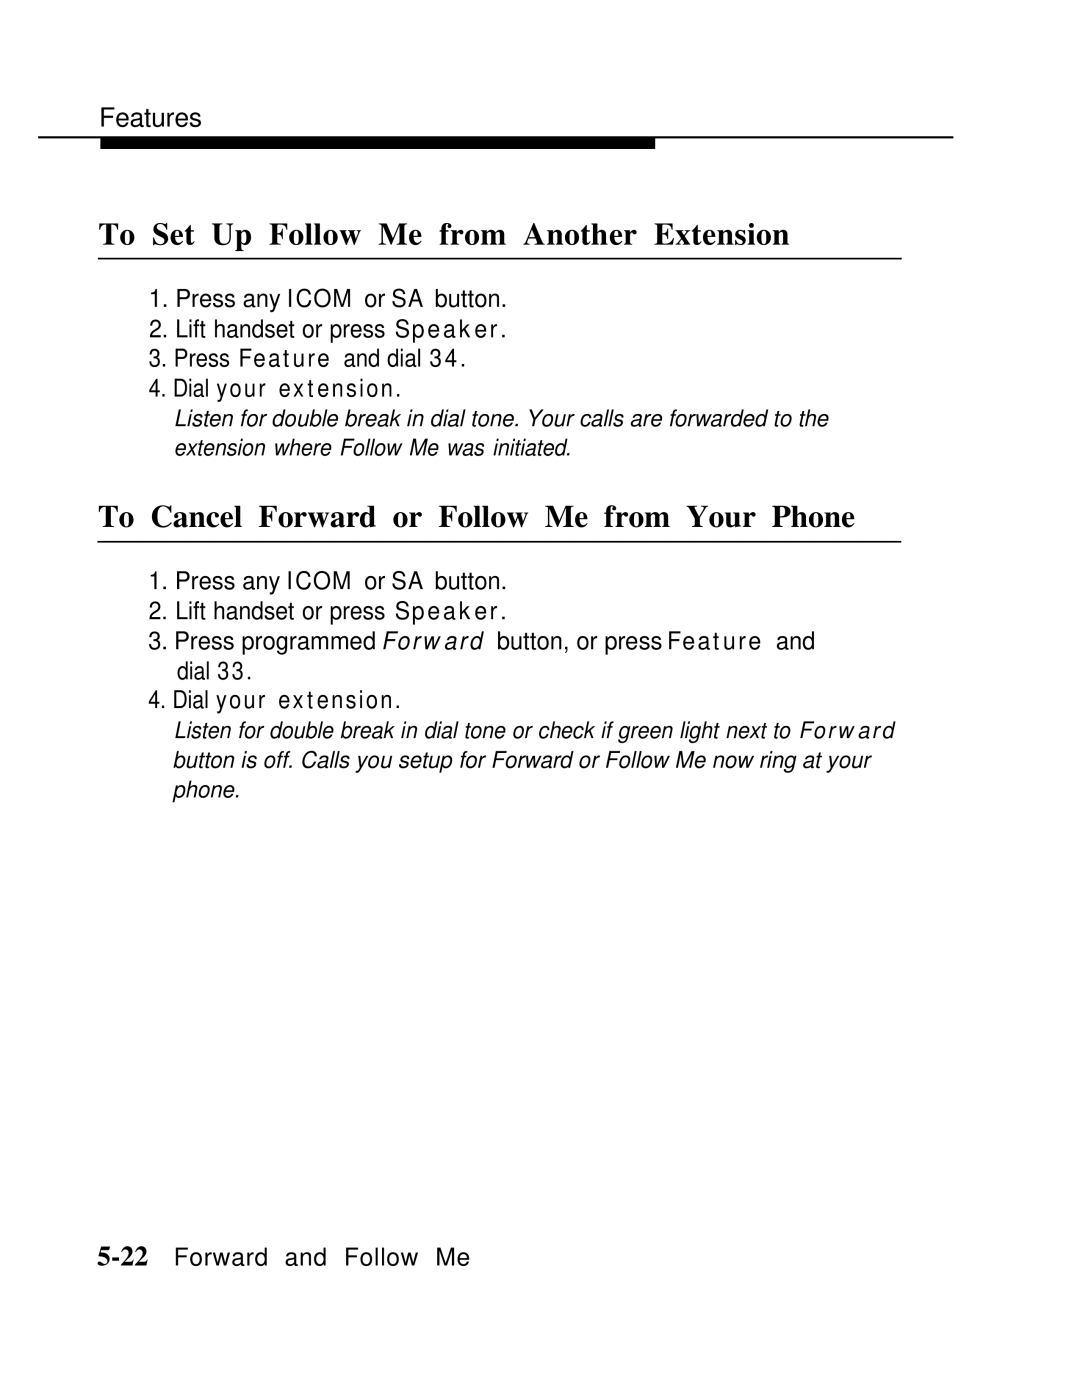 AT&T MLX-10 manual To Set Up Follow Me from Another Extension, To Cancel Forward or Follow Me from Your Phone 